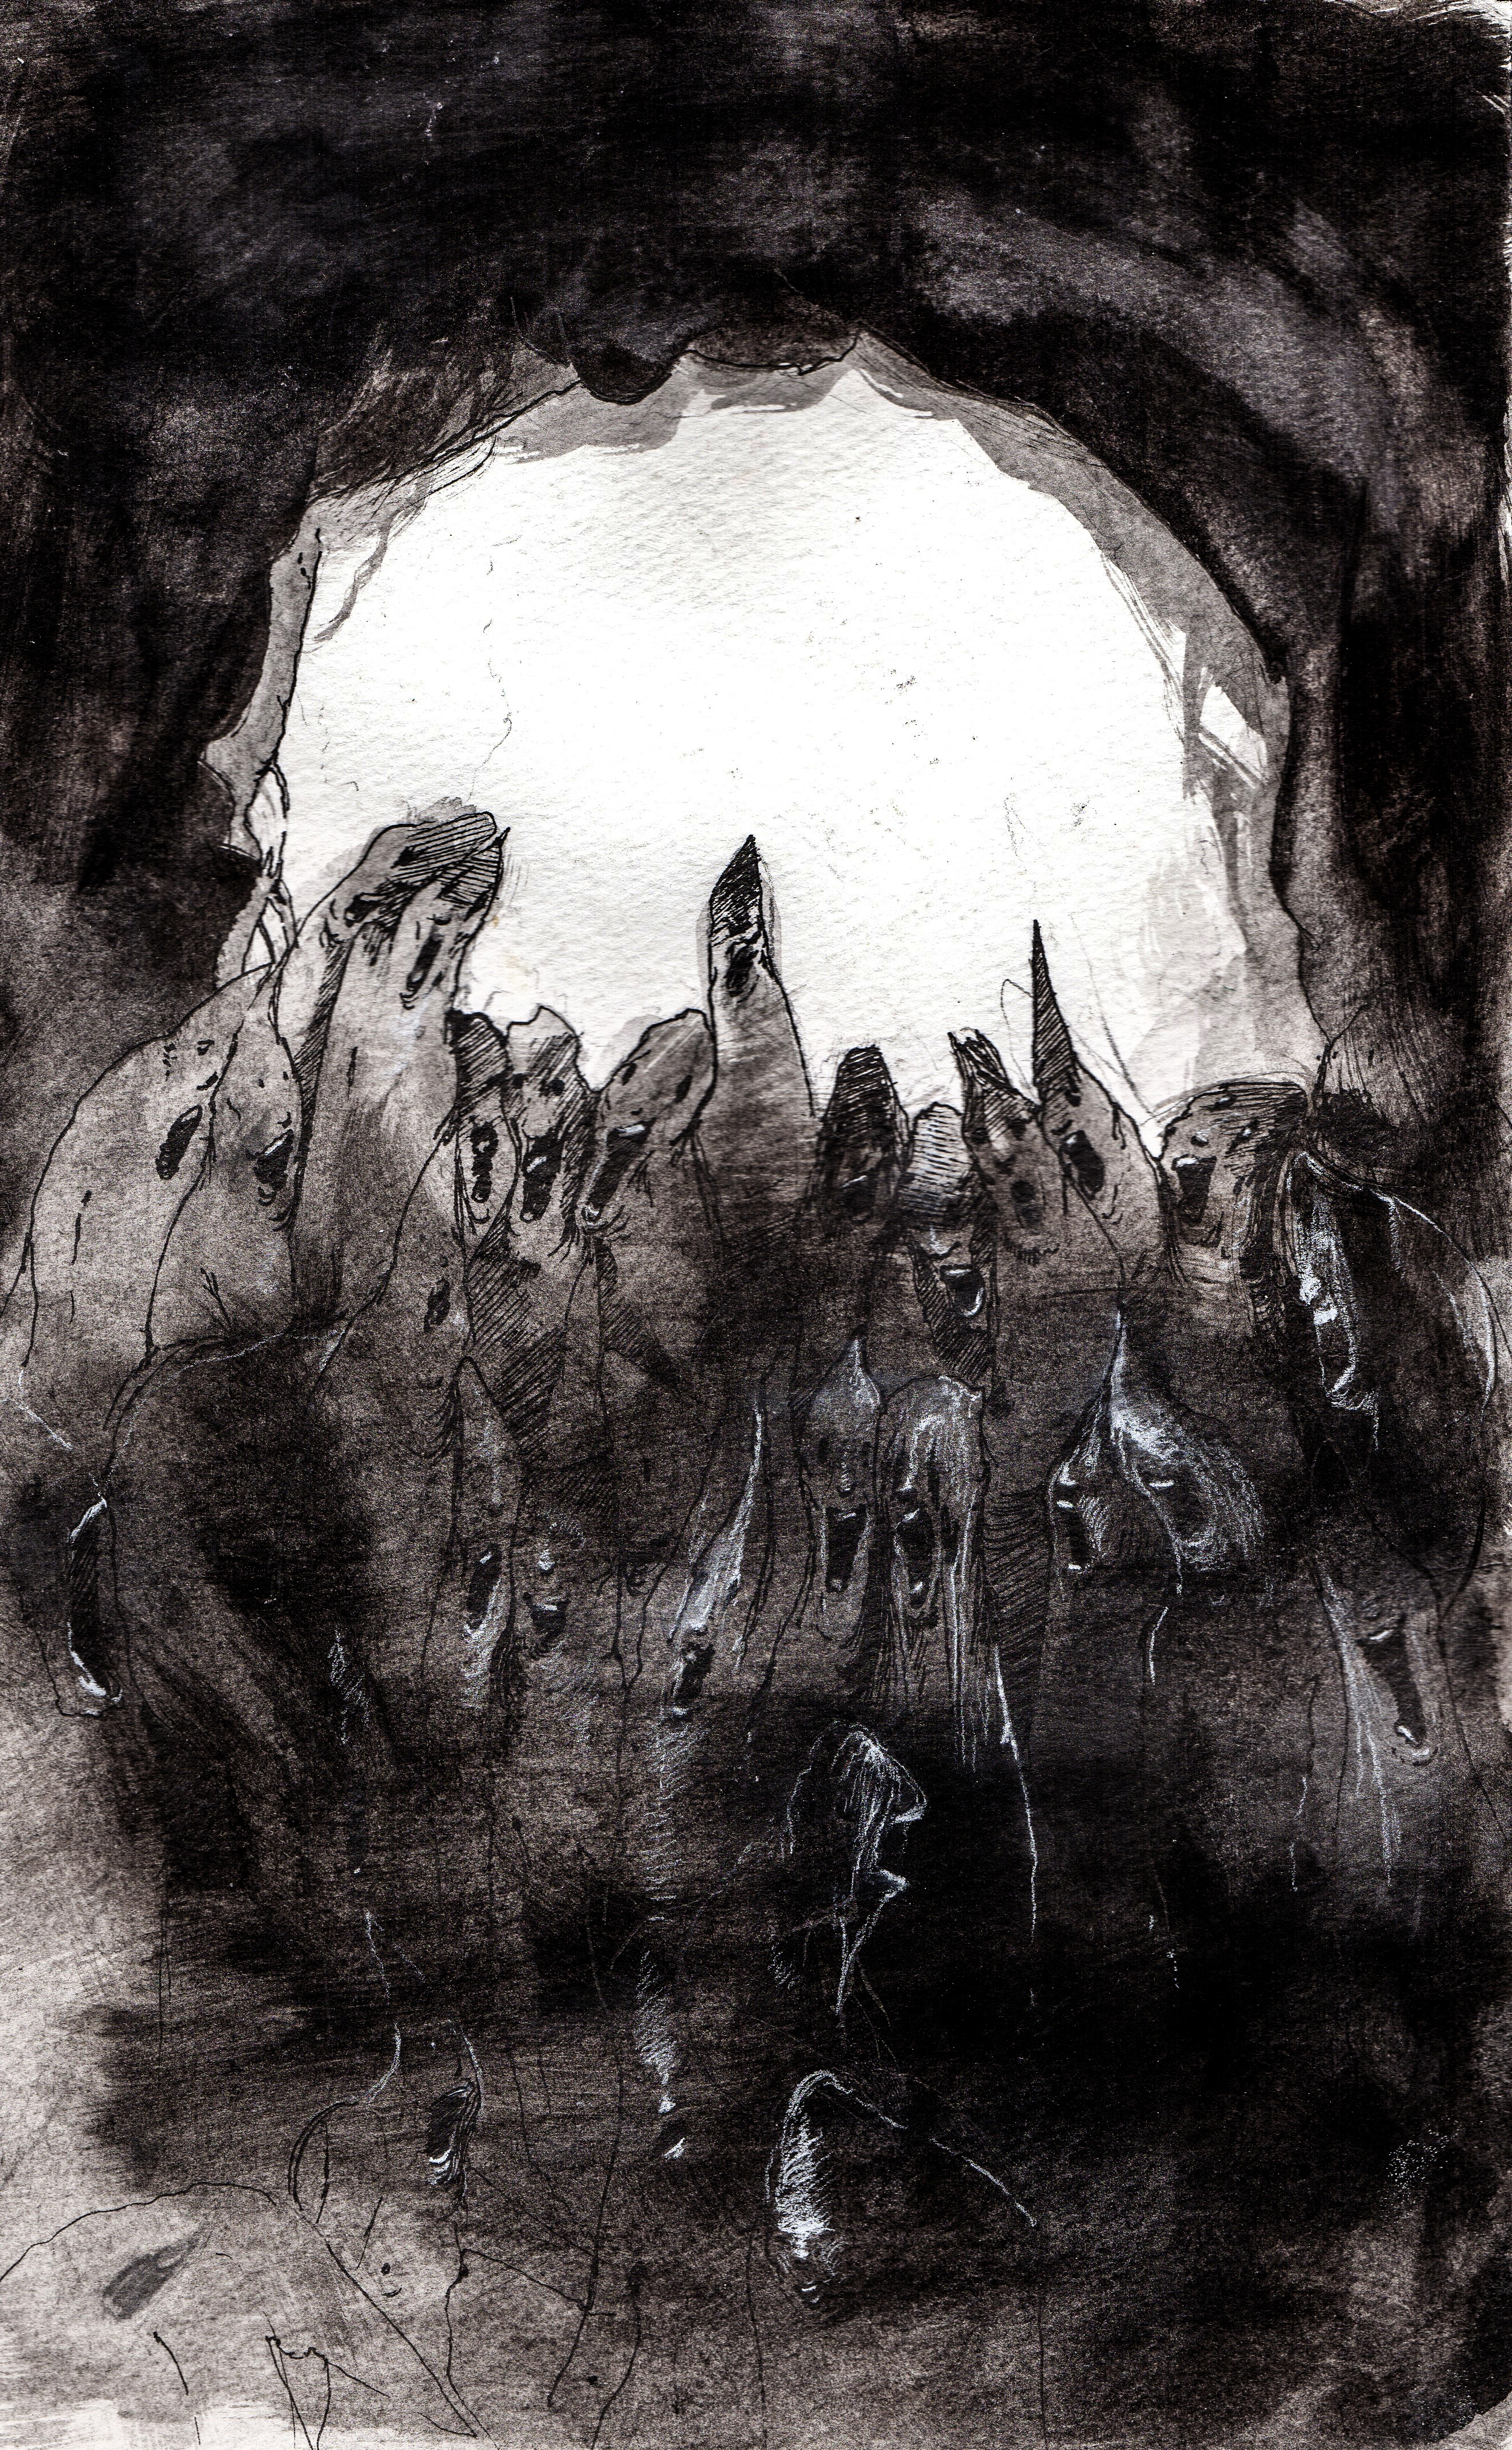    The light wholly consumes  . 2013. 10 x 15 inches. Ink wash on paper. 